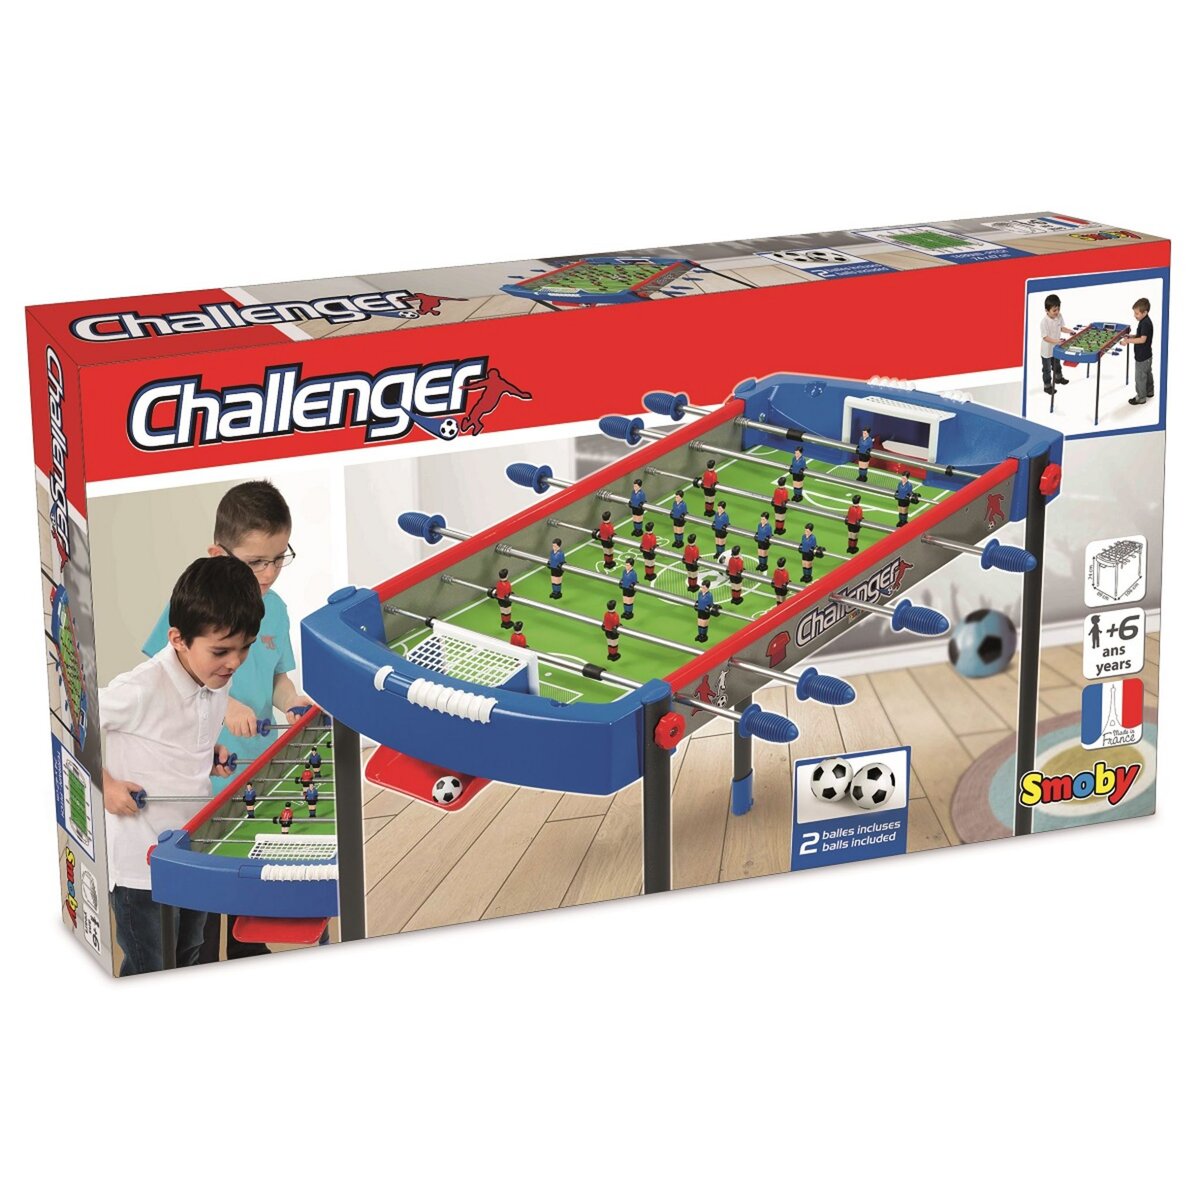 Promo Baby-foot challenger smoby chez Casino Supermarchés